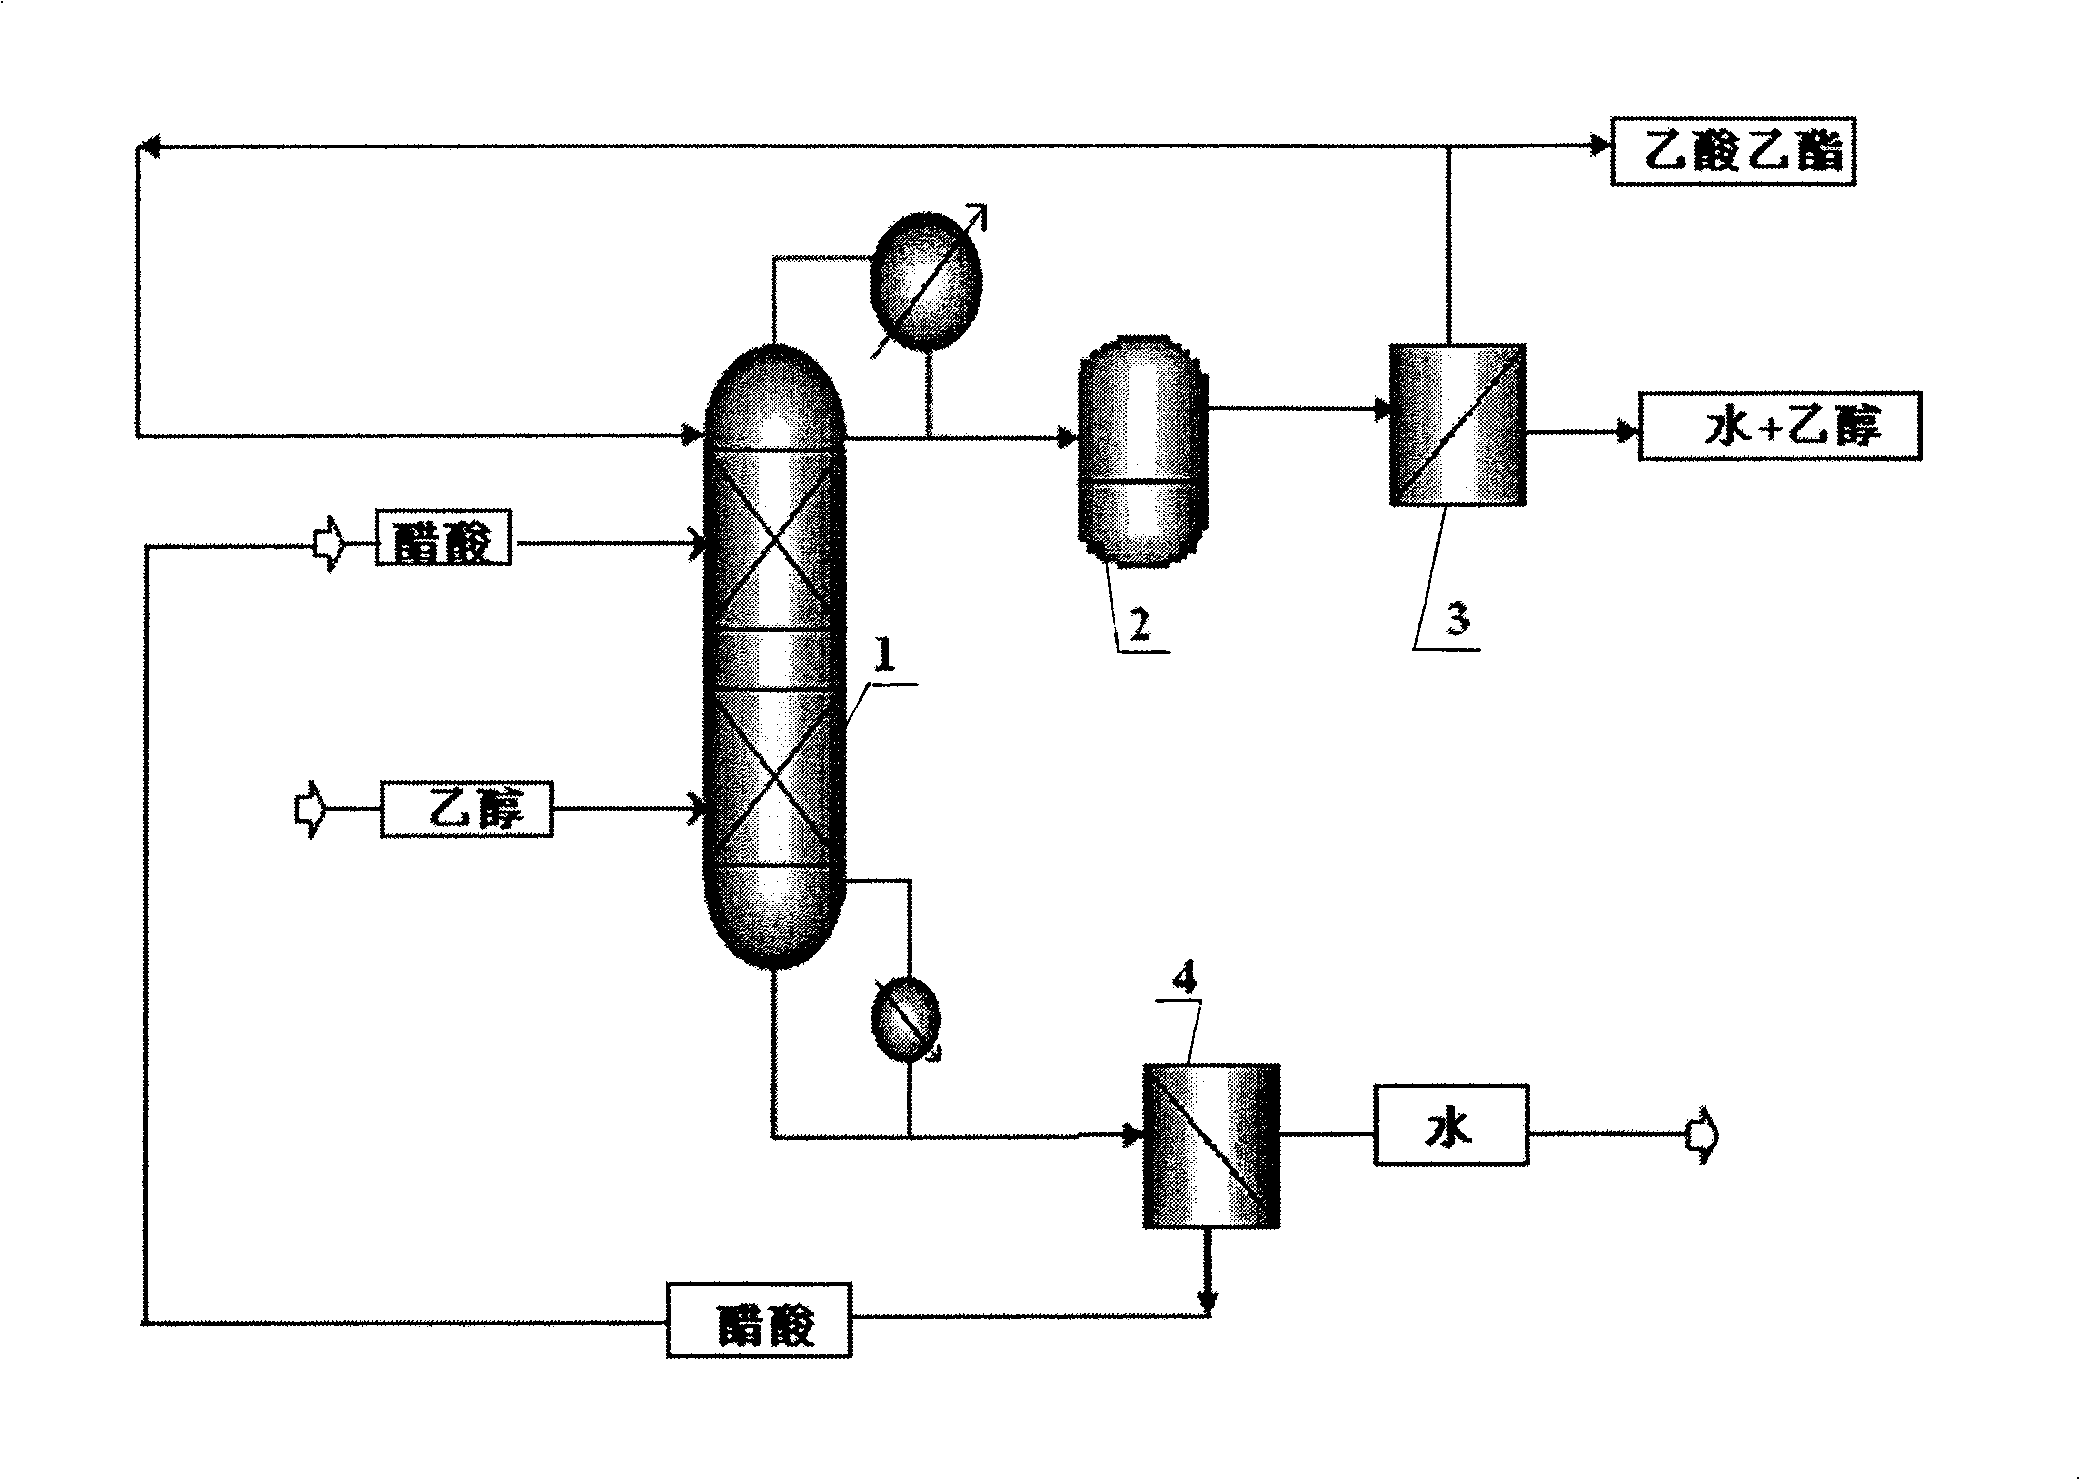 Method for producing ethyl acetate with coupled reaction distillation and permeation steam generation